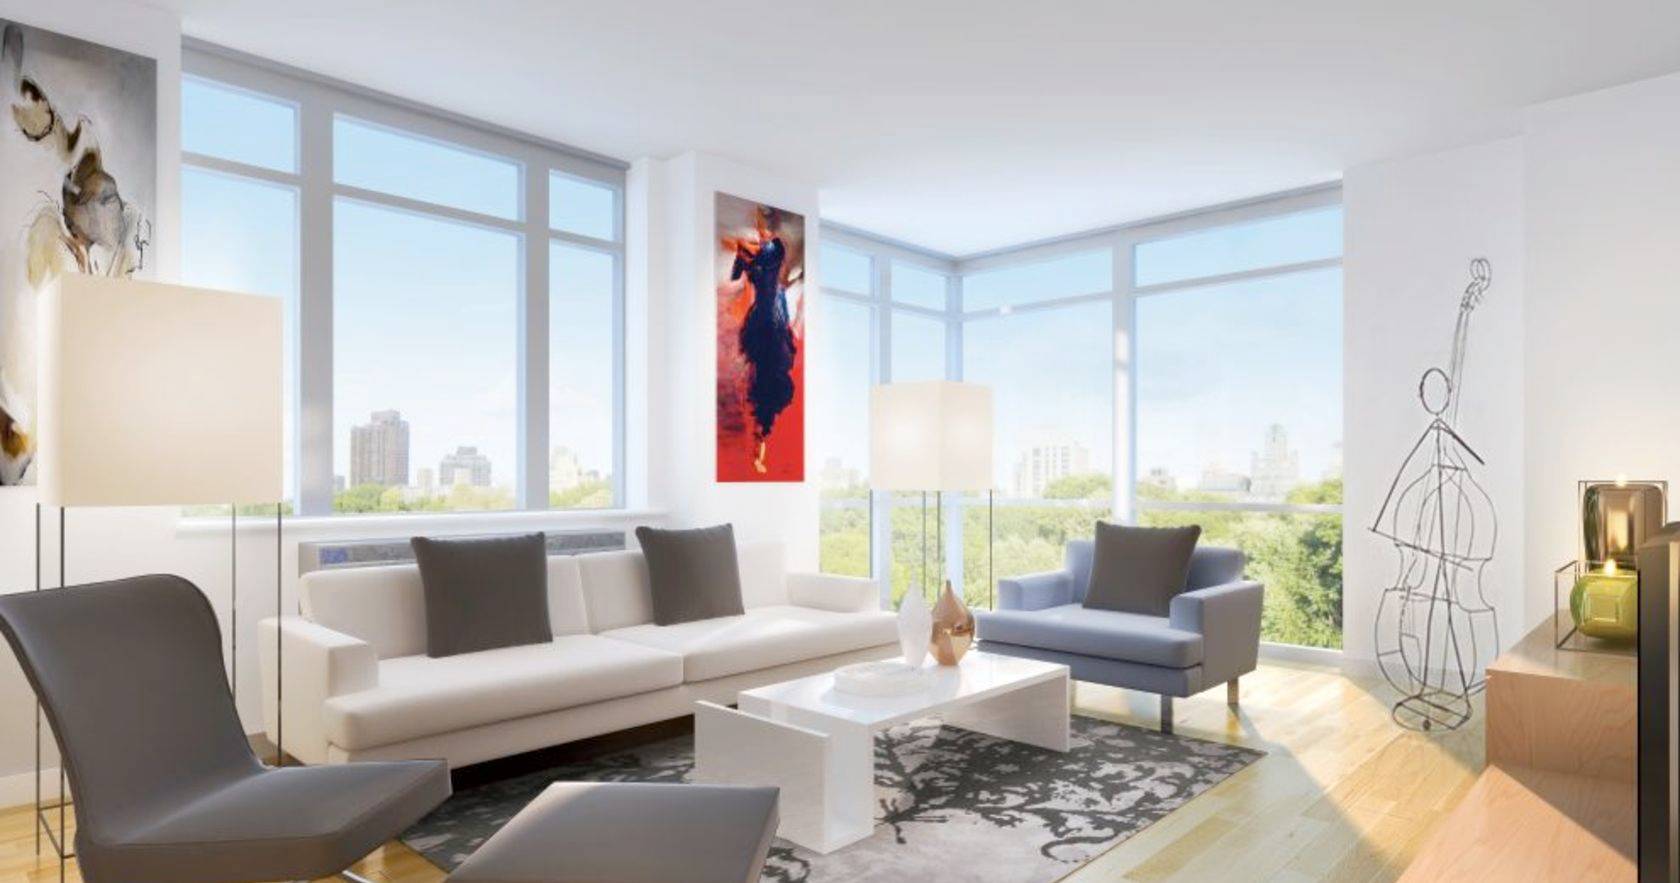 ★★★★★Upper West Side <> Ultra Luxury 3 Bed /2.5 Bath   Condo For Rent <> 24Hr Doorman <> Pool , Gym & Tennis Court. Steps To Colubus Circle and Lincoln Square